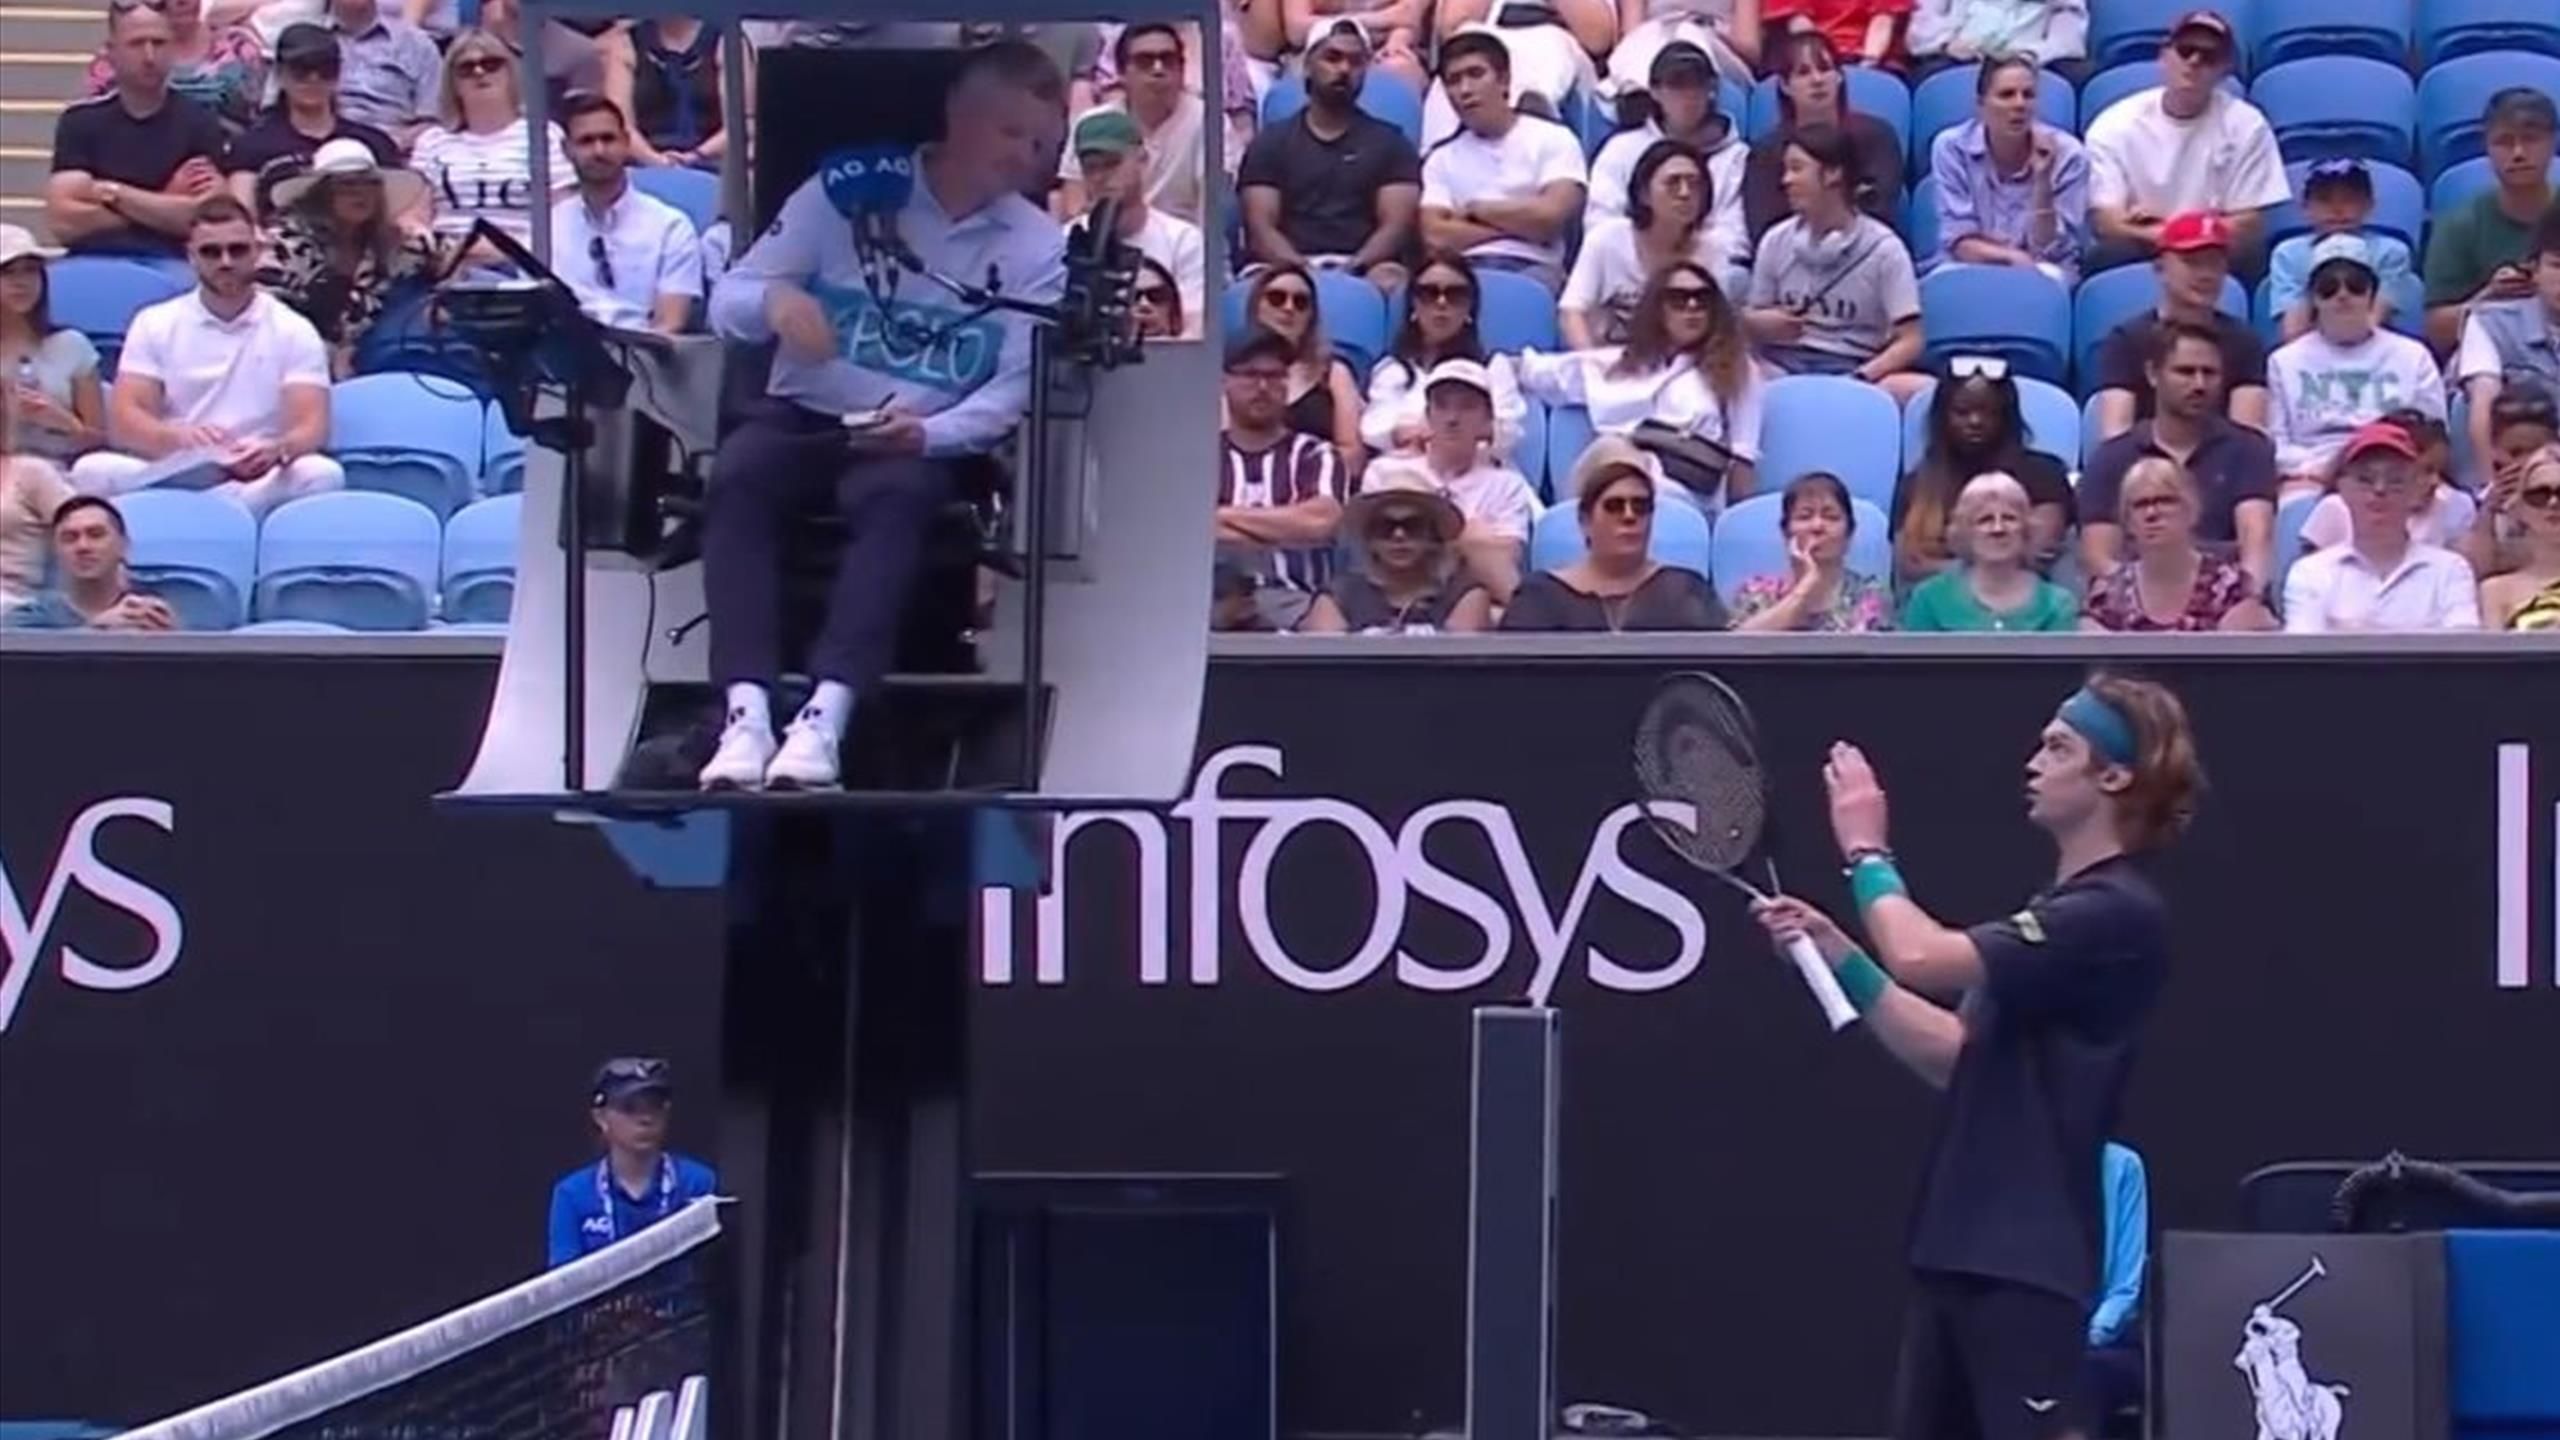 Australian Open – Andrey Rublev argues with referee in opening match: 'You don't have to decide'